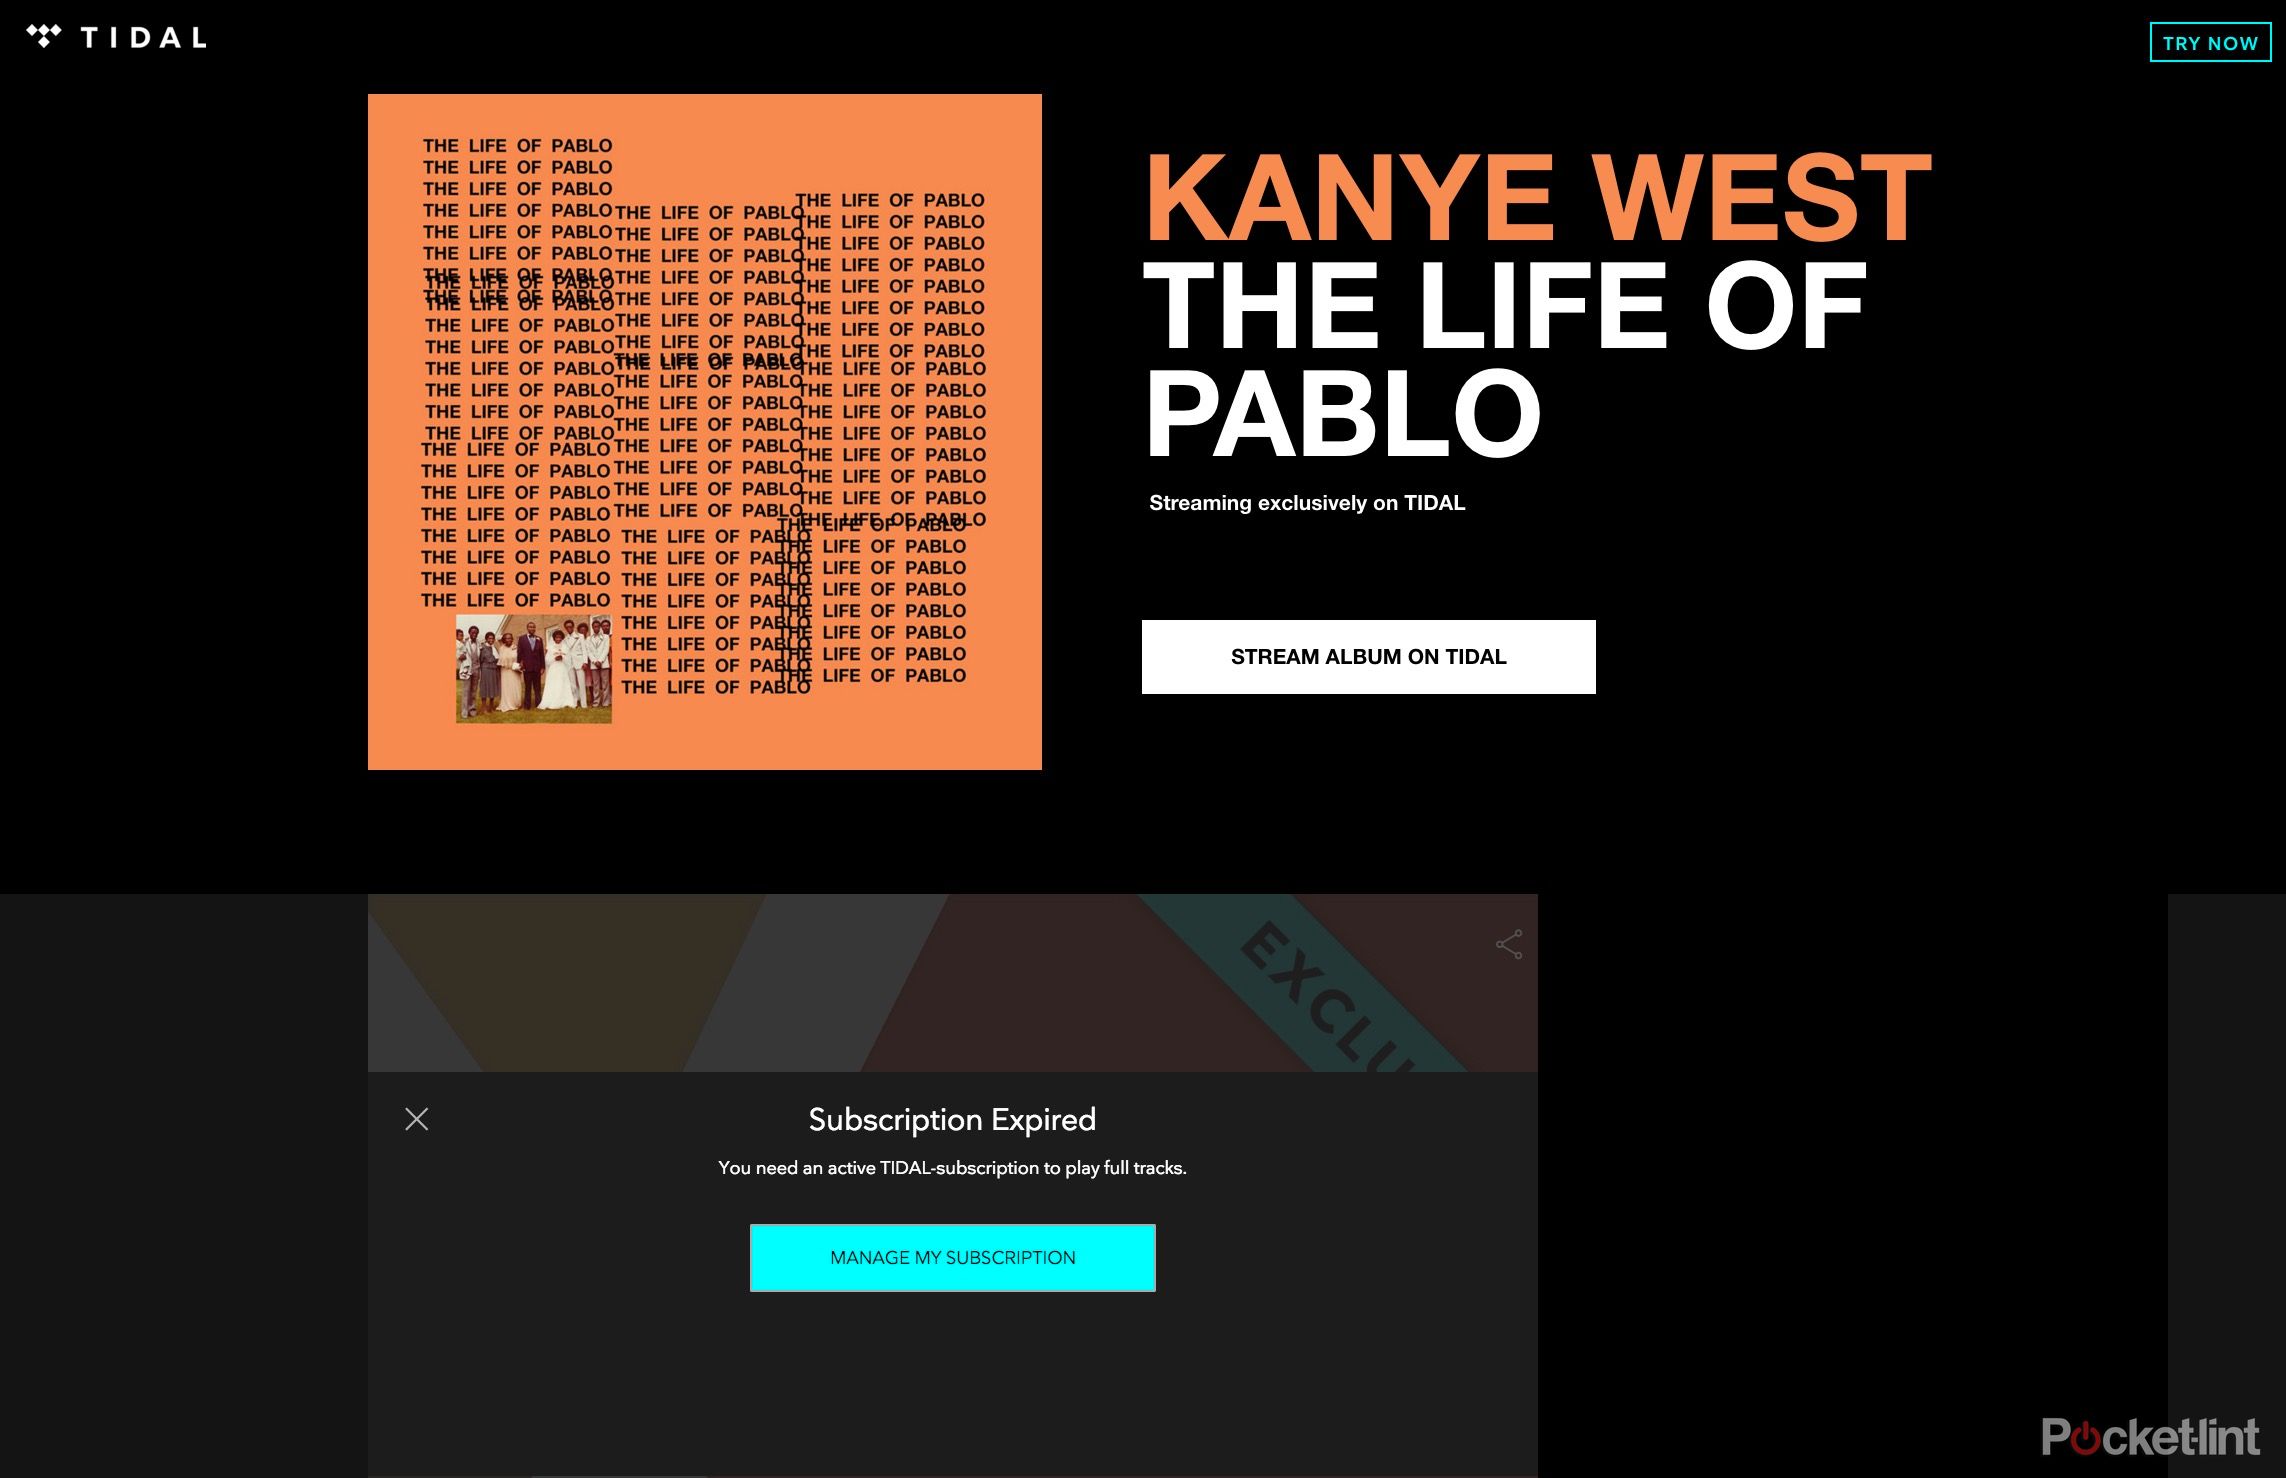 tidal extended its free trial by 30 days all because kanye updated his album image 1